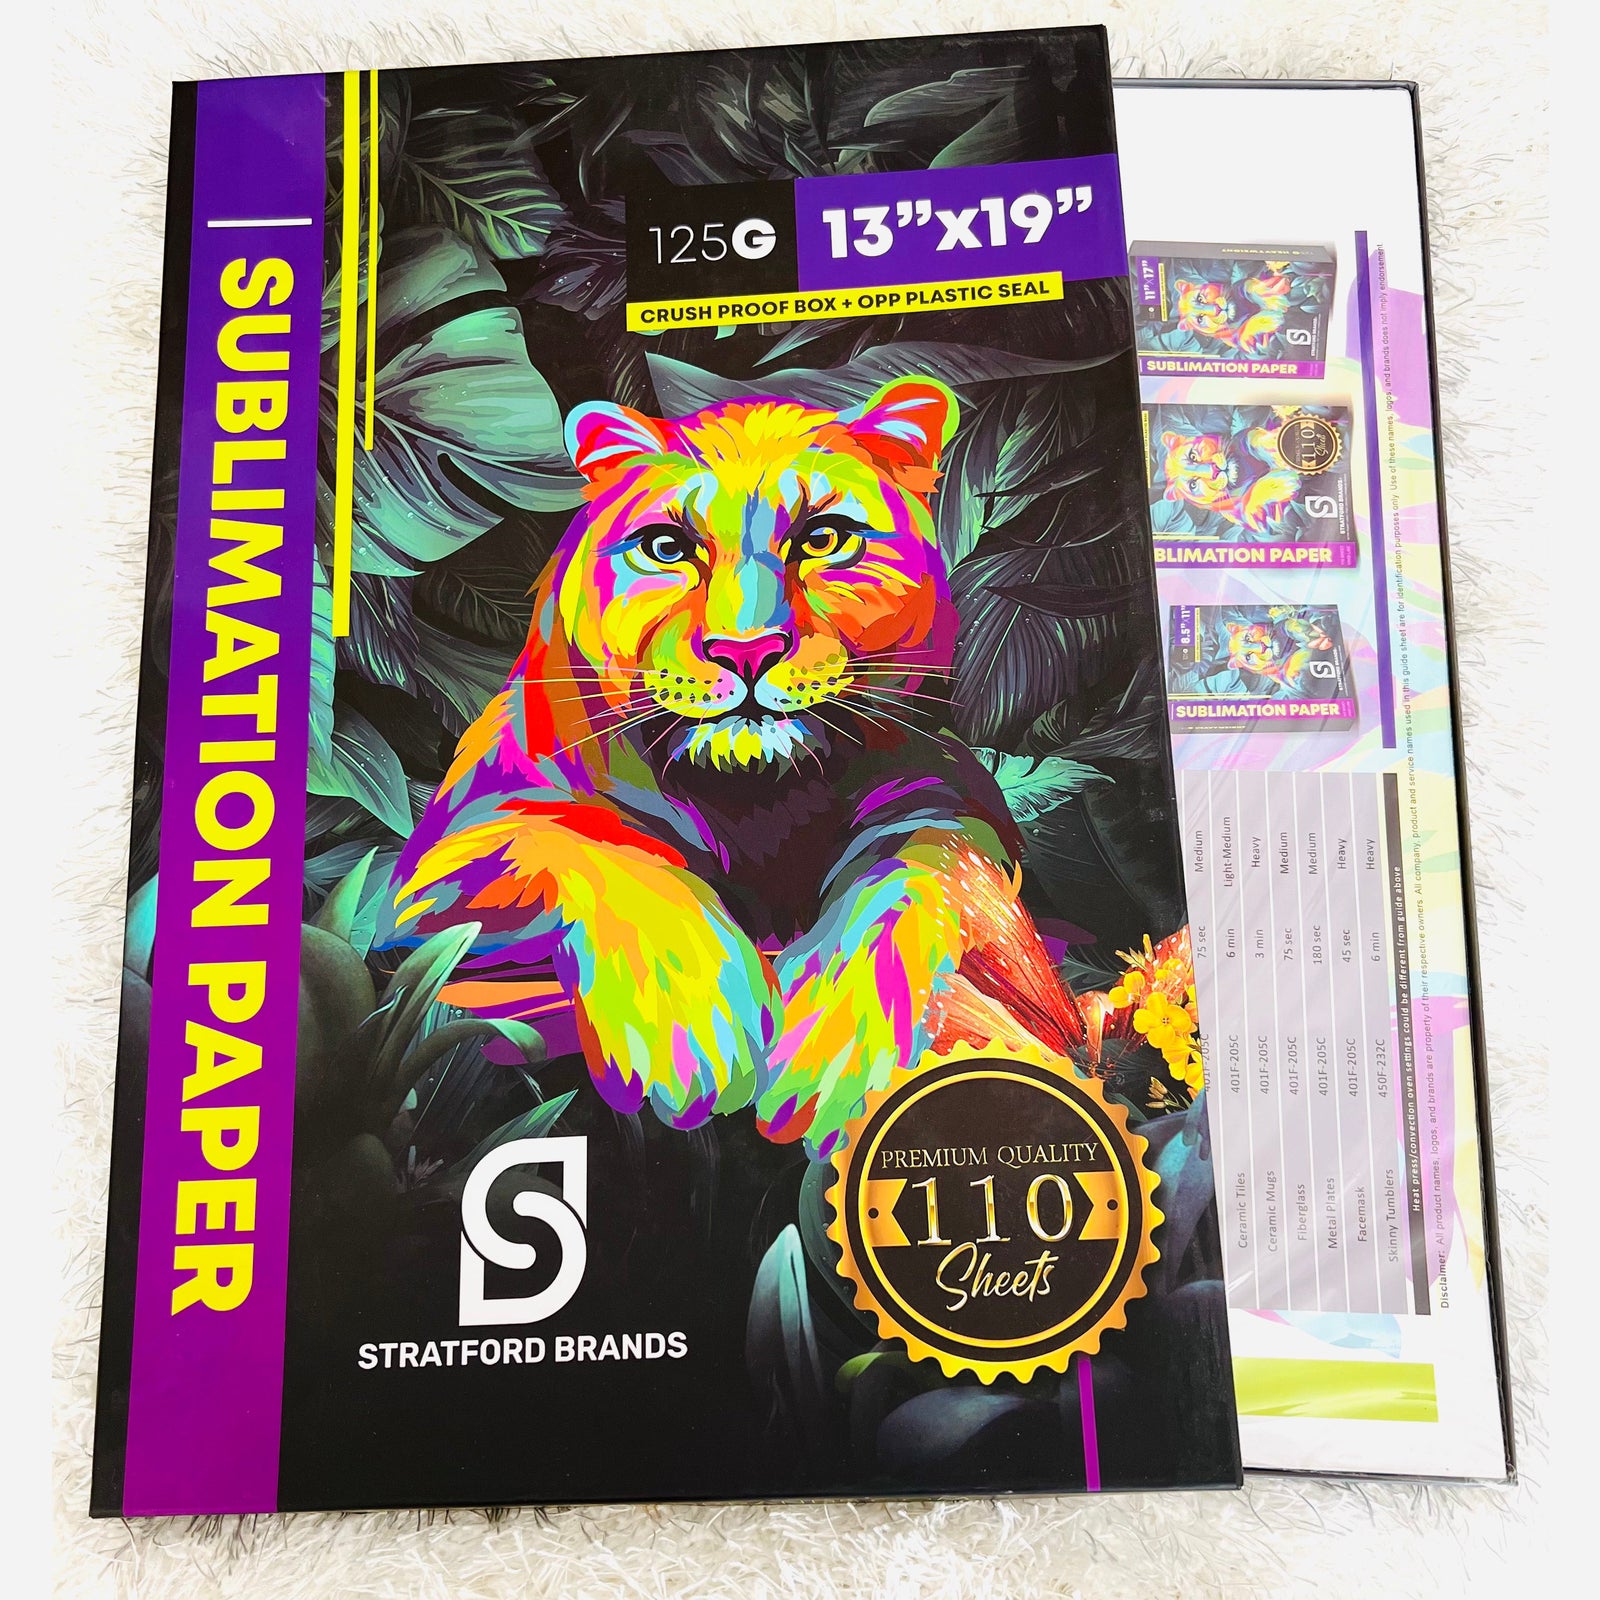 Stratford Brands - Sublimation Paper 13x19 inches - 125GSM/110 Sheets